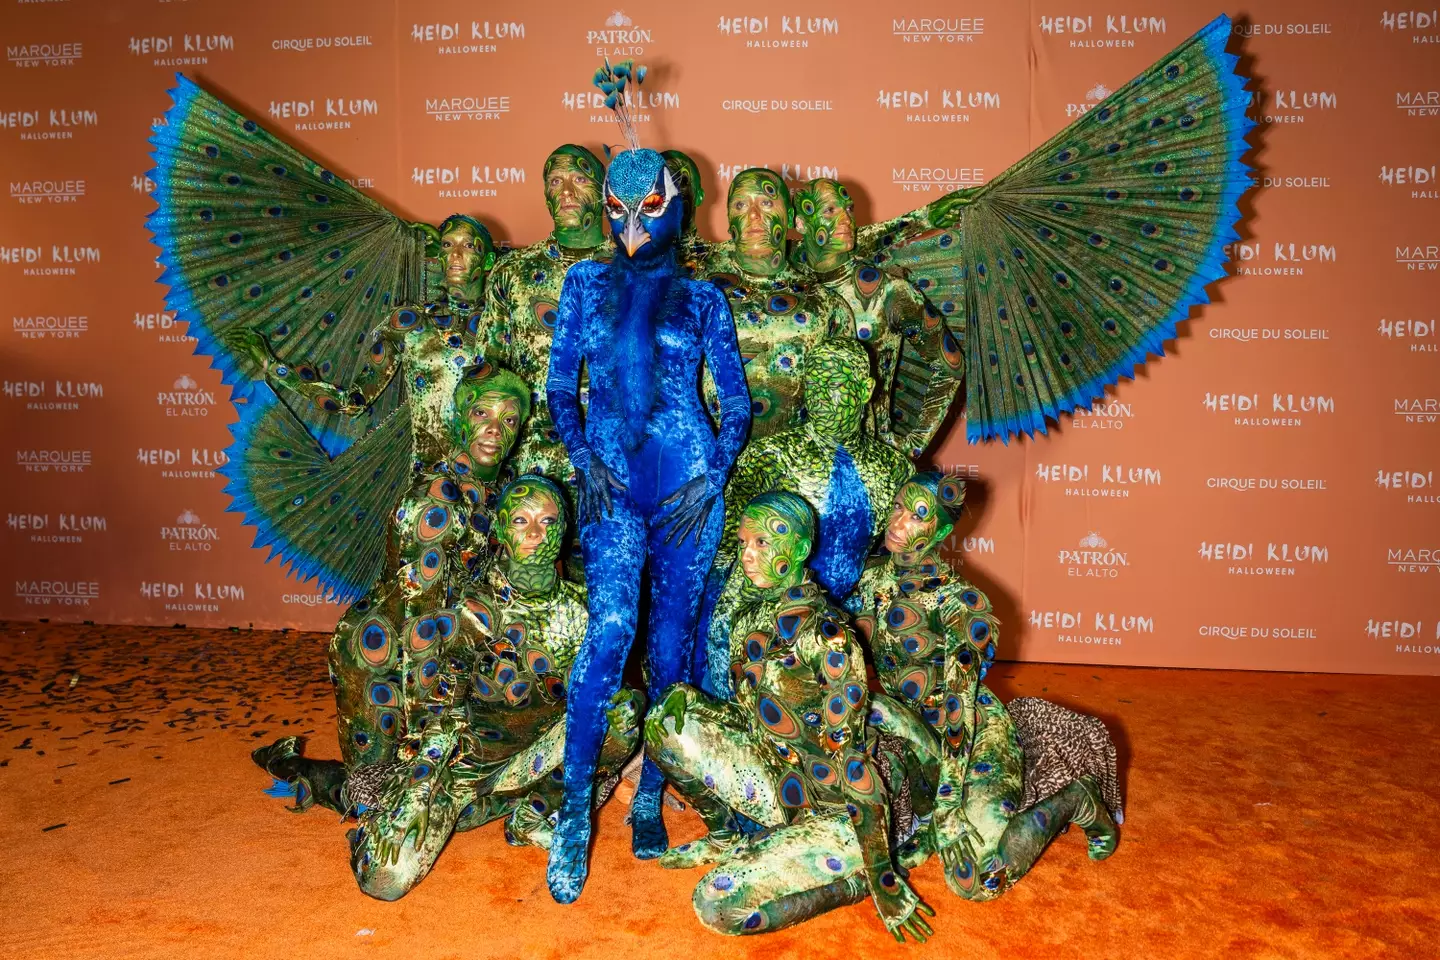 Heidi Klum dressed as a peacock this Halloween, with a bit of help from others.